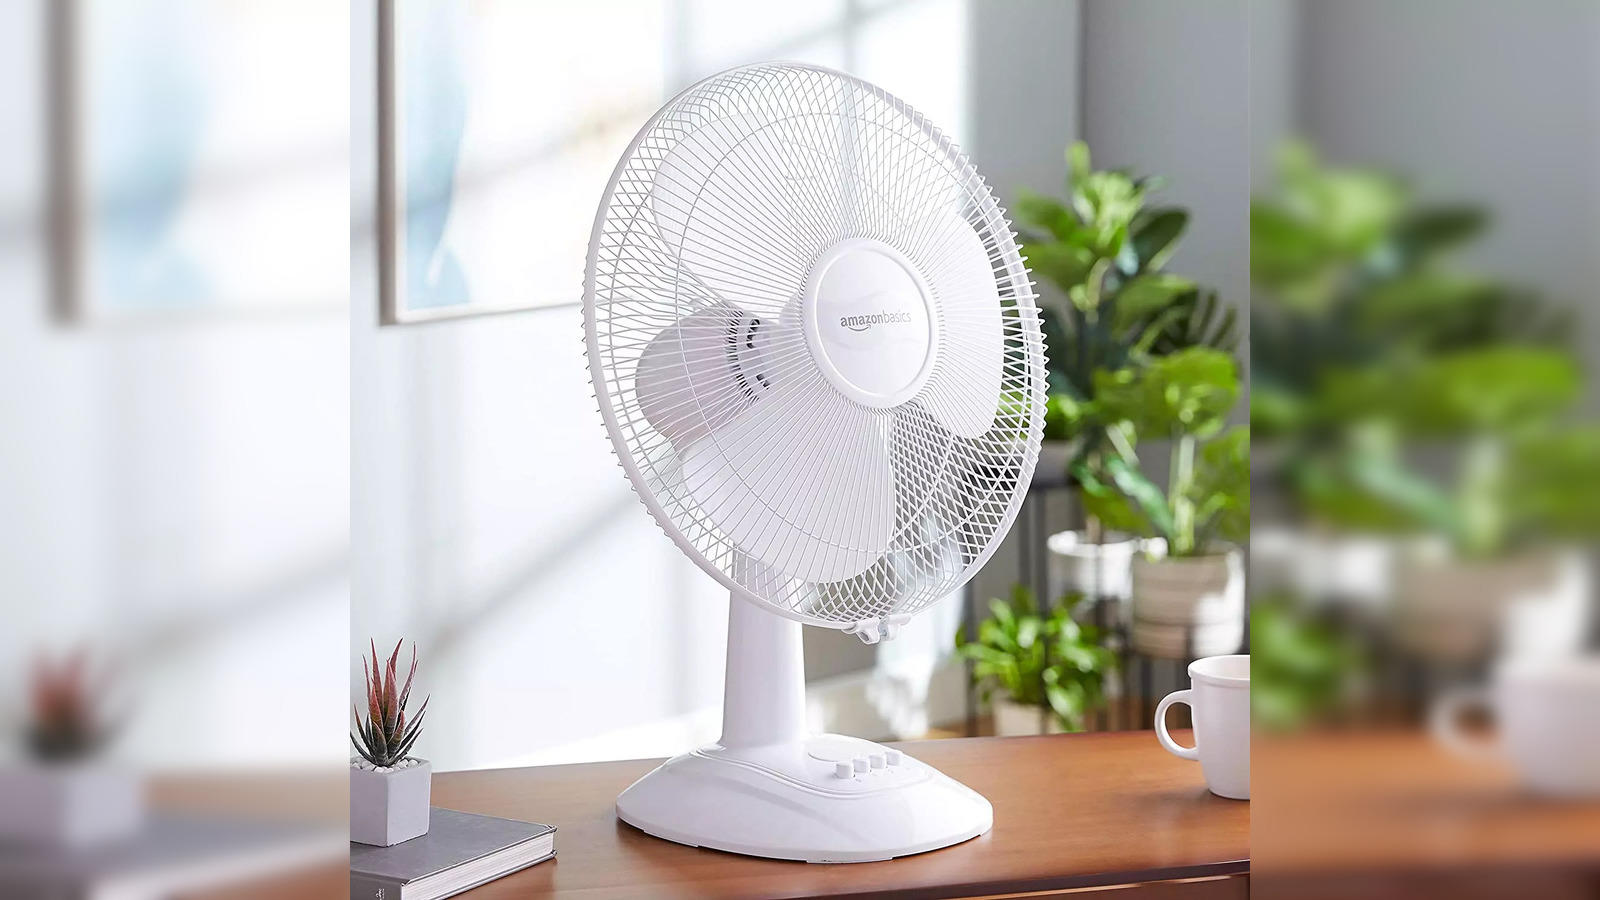 https://img.etimg.com/thumb/width-1600,height-900,imgsize-138980,resizemode-75,msid-98404901/top-trending-products/news/amazon-summer-cooling-days-best-table-fans-at-up-to-35-discount.jpg